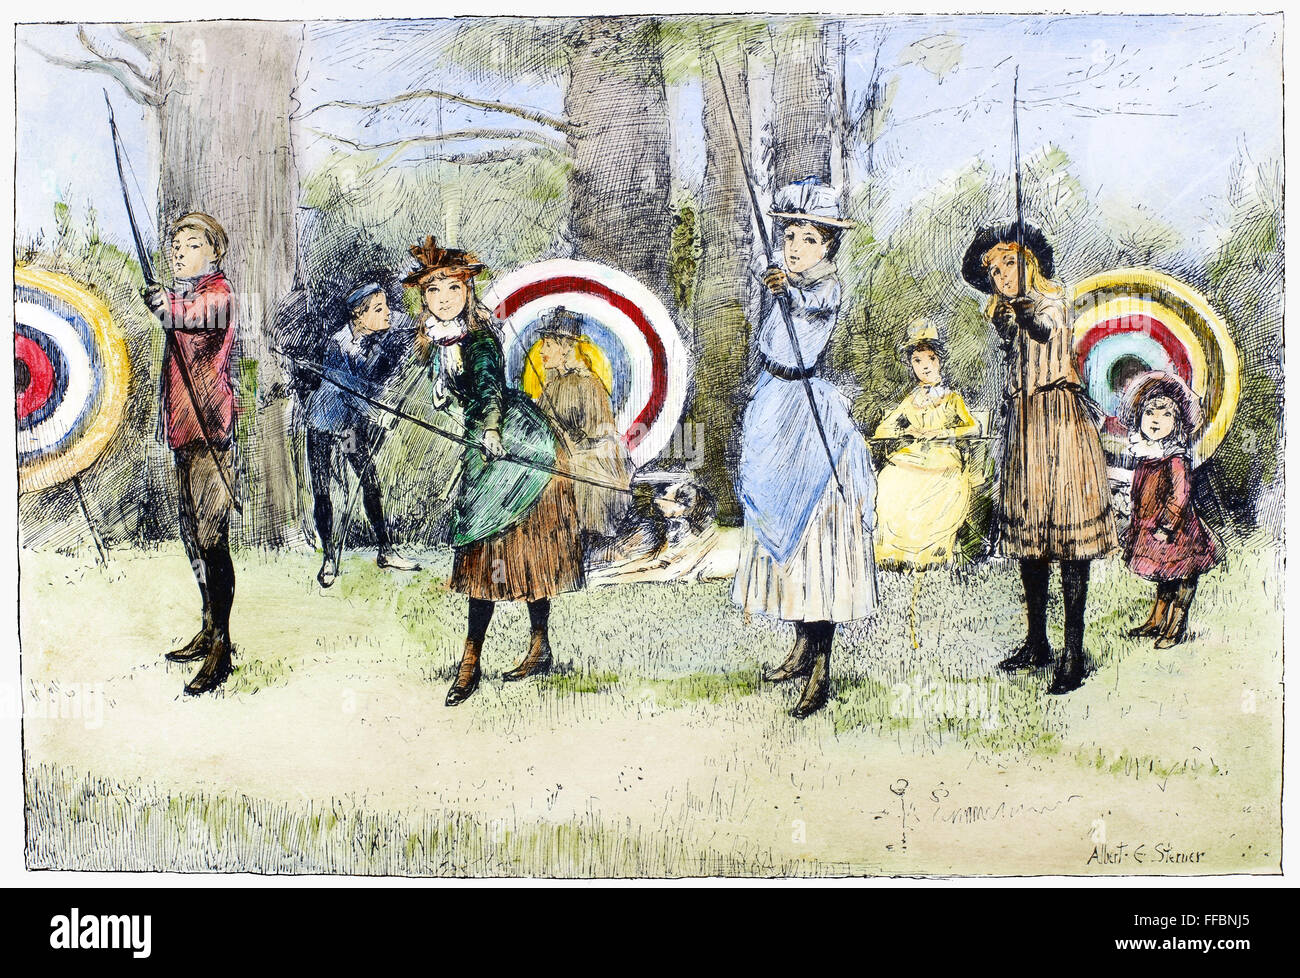 ARCHERY, 1886. /nYoung archers. Pen-and-ink drawing, 1886, by Albert Edward Sterner. Stock Photo